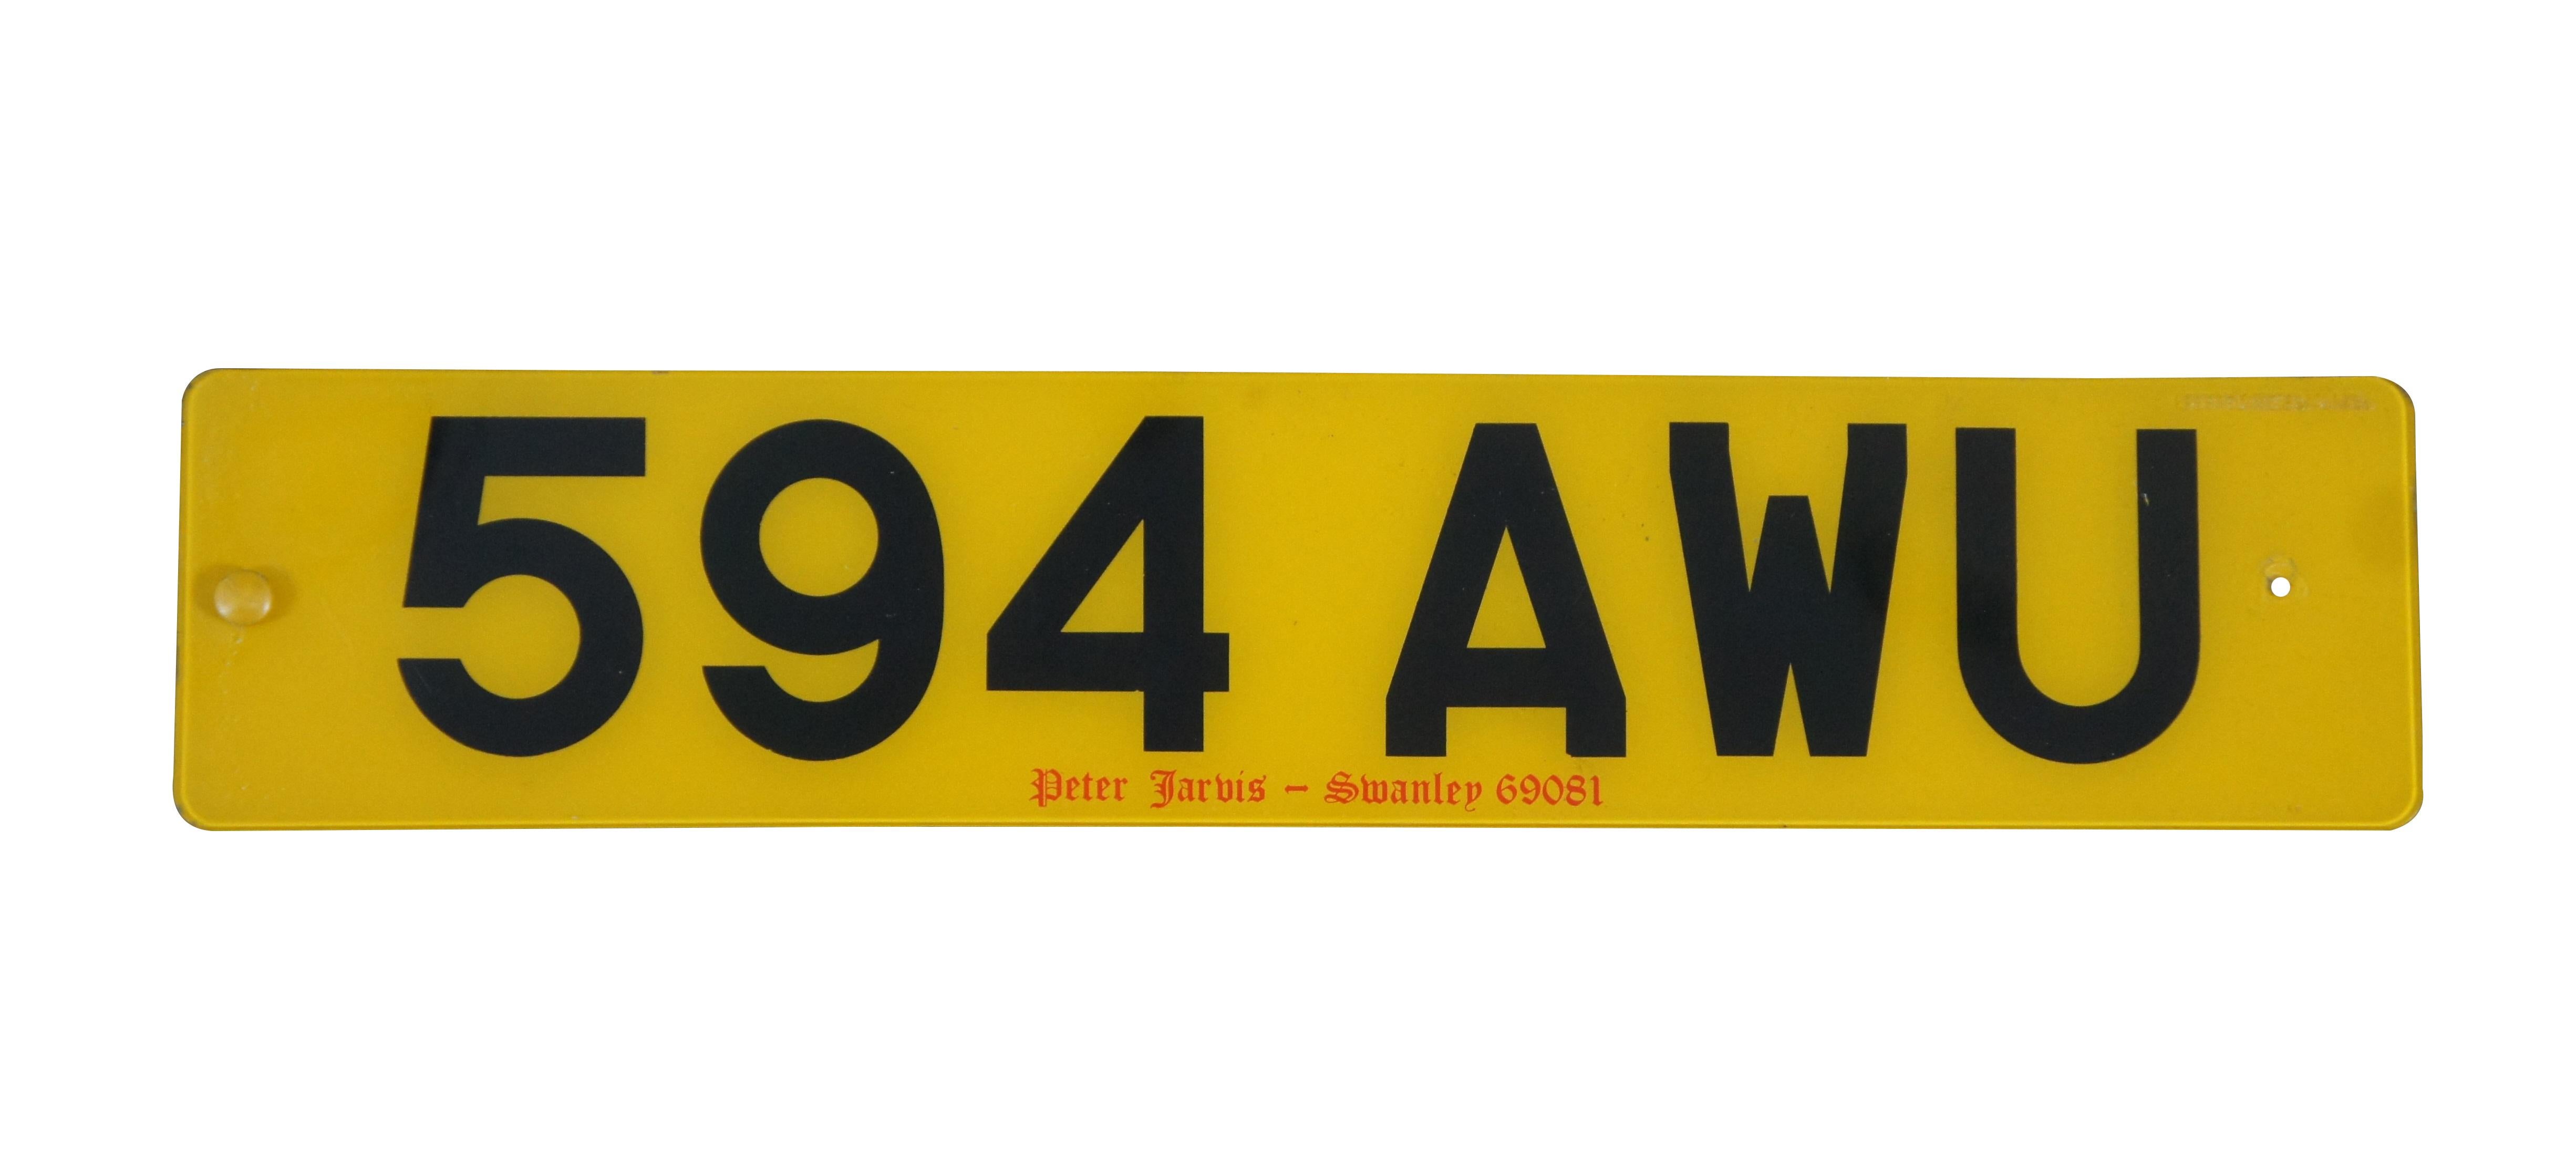 Pair of vintage plastic vehicle registration / license plates from Great Britain, one white and one yellow. Number 594 AWU.  Peter Jarvis - Swanley 69081.

Peter Jarvis is a purveyor of classic cars based in Swanley, Kent,